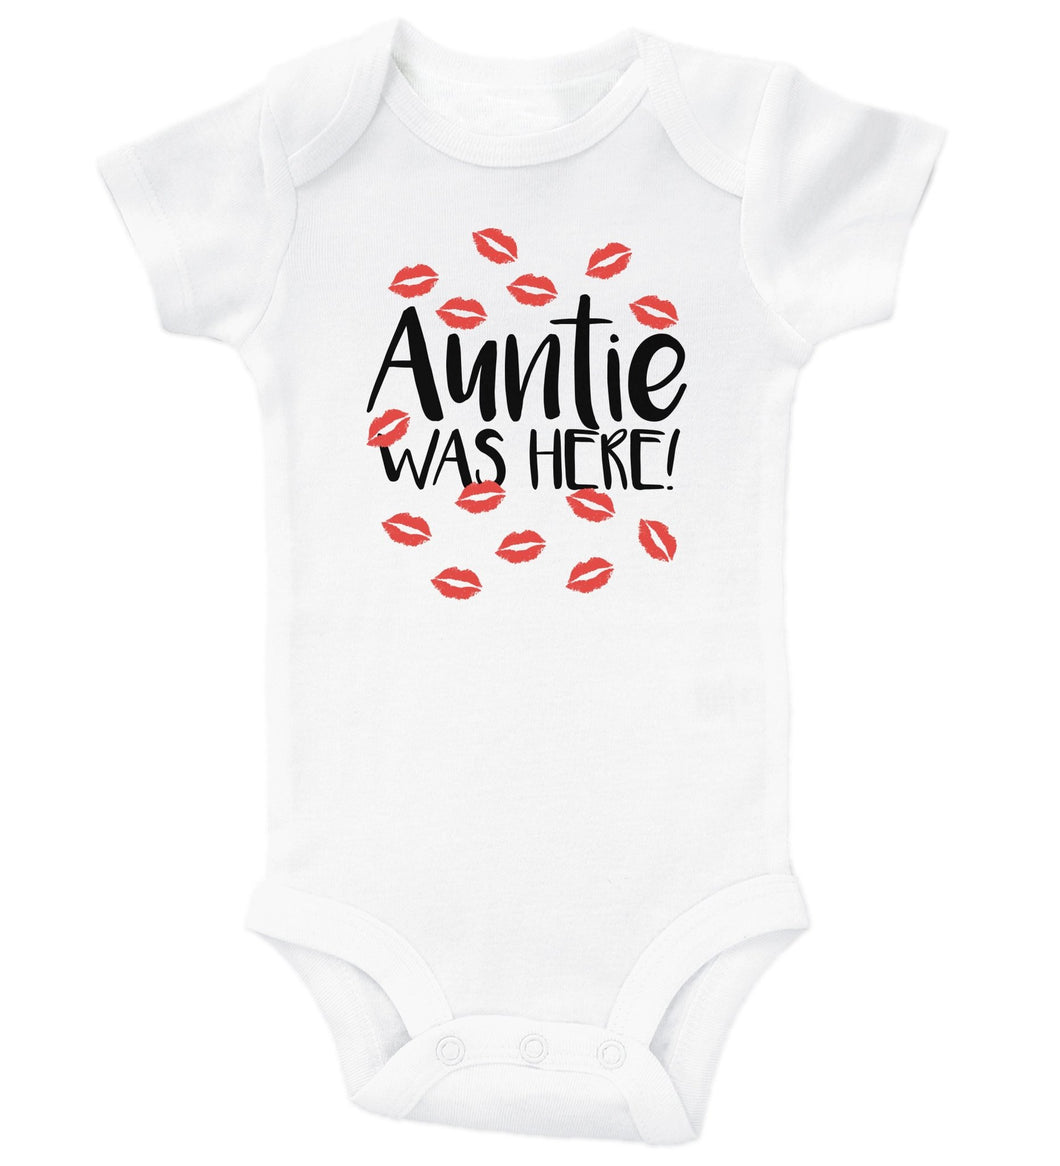 AUNTIE WAS HERE - Red Kisses - Basic Onesie - Baffle